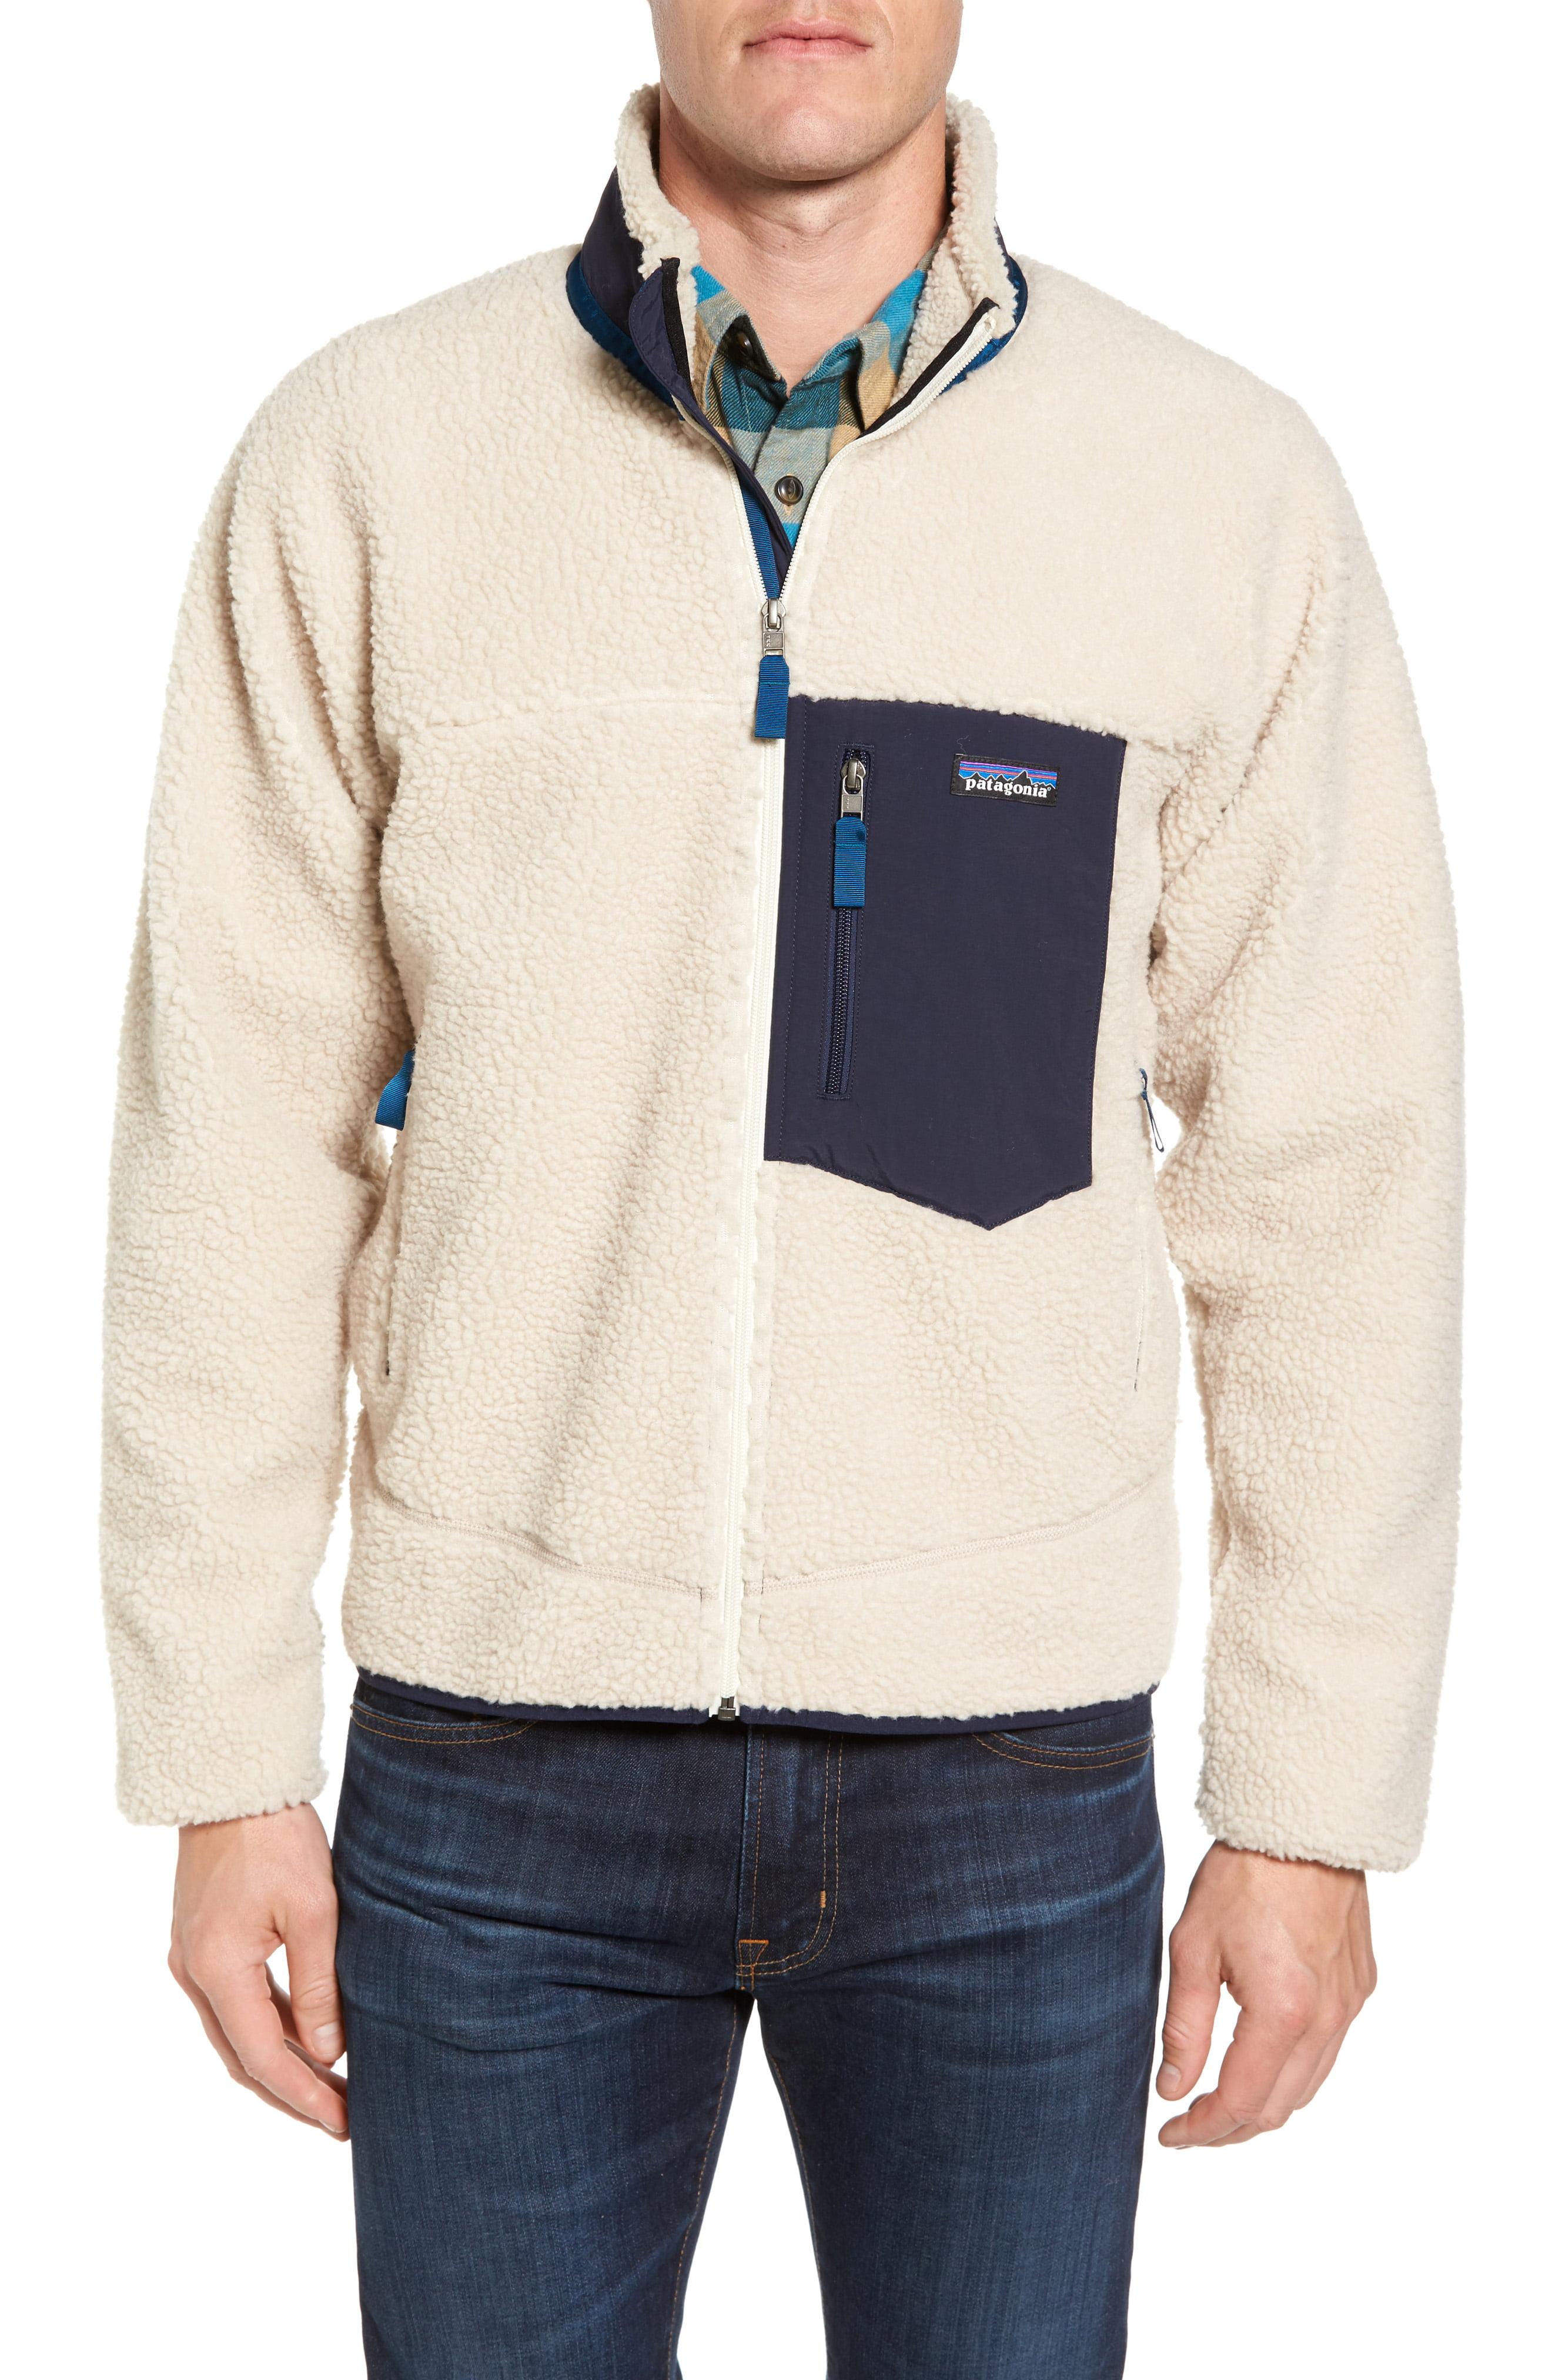 Patagonia Retro-x Fleece Jacket in Natural for Men - Lyst